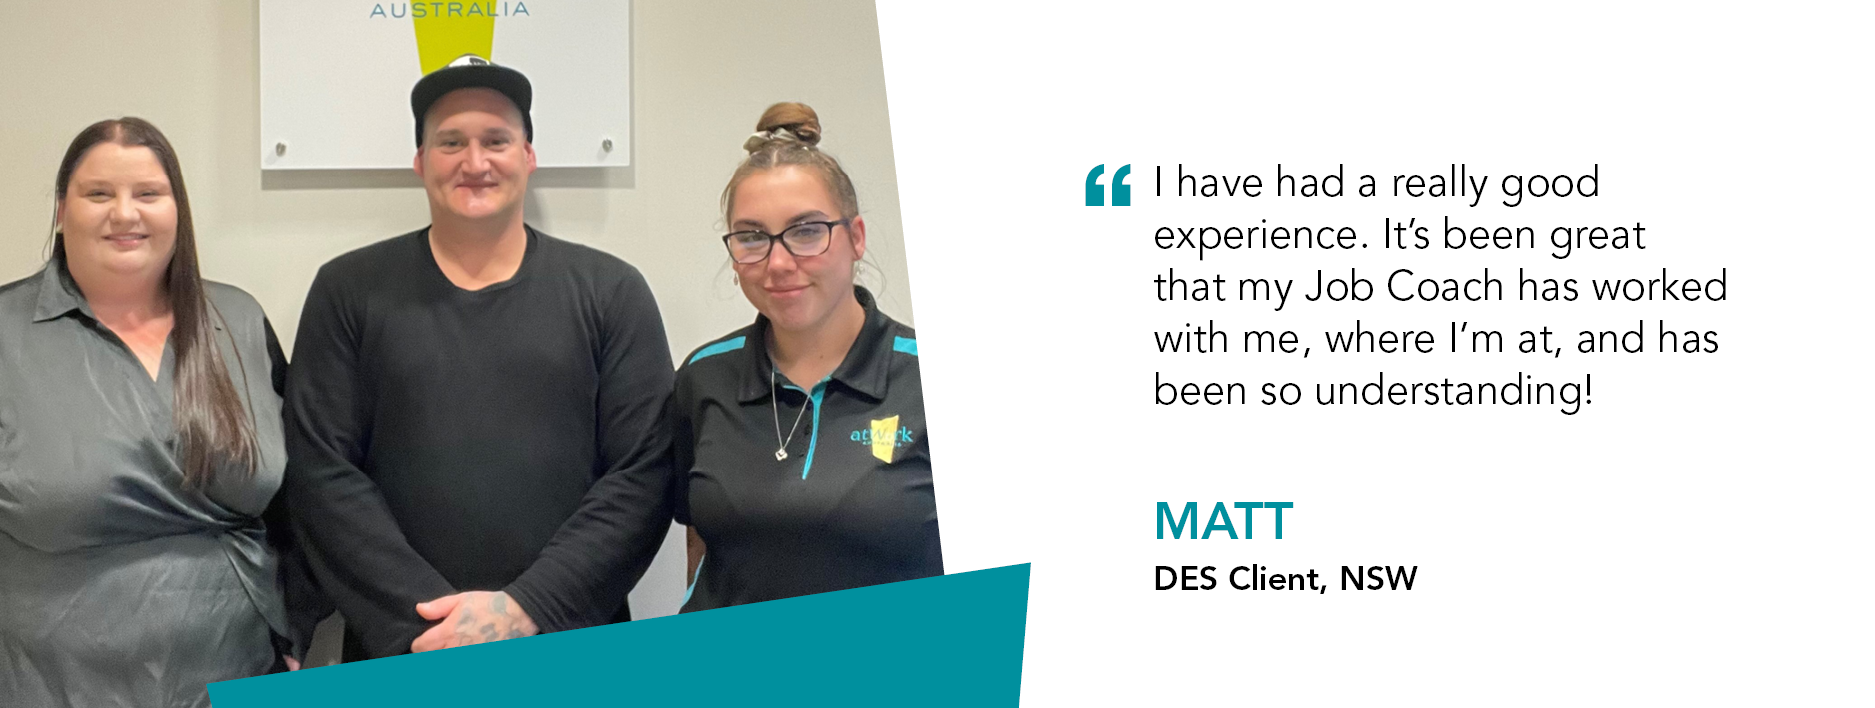 Quote reads "I have had a good experience. It's been great that my Job Coach has worked with me, where I'm at and has been so understanding." said Disability Employment Services Client Matt from New South Wales